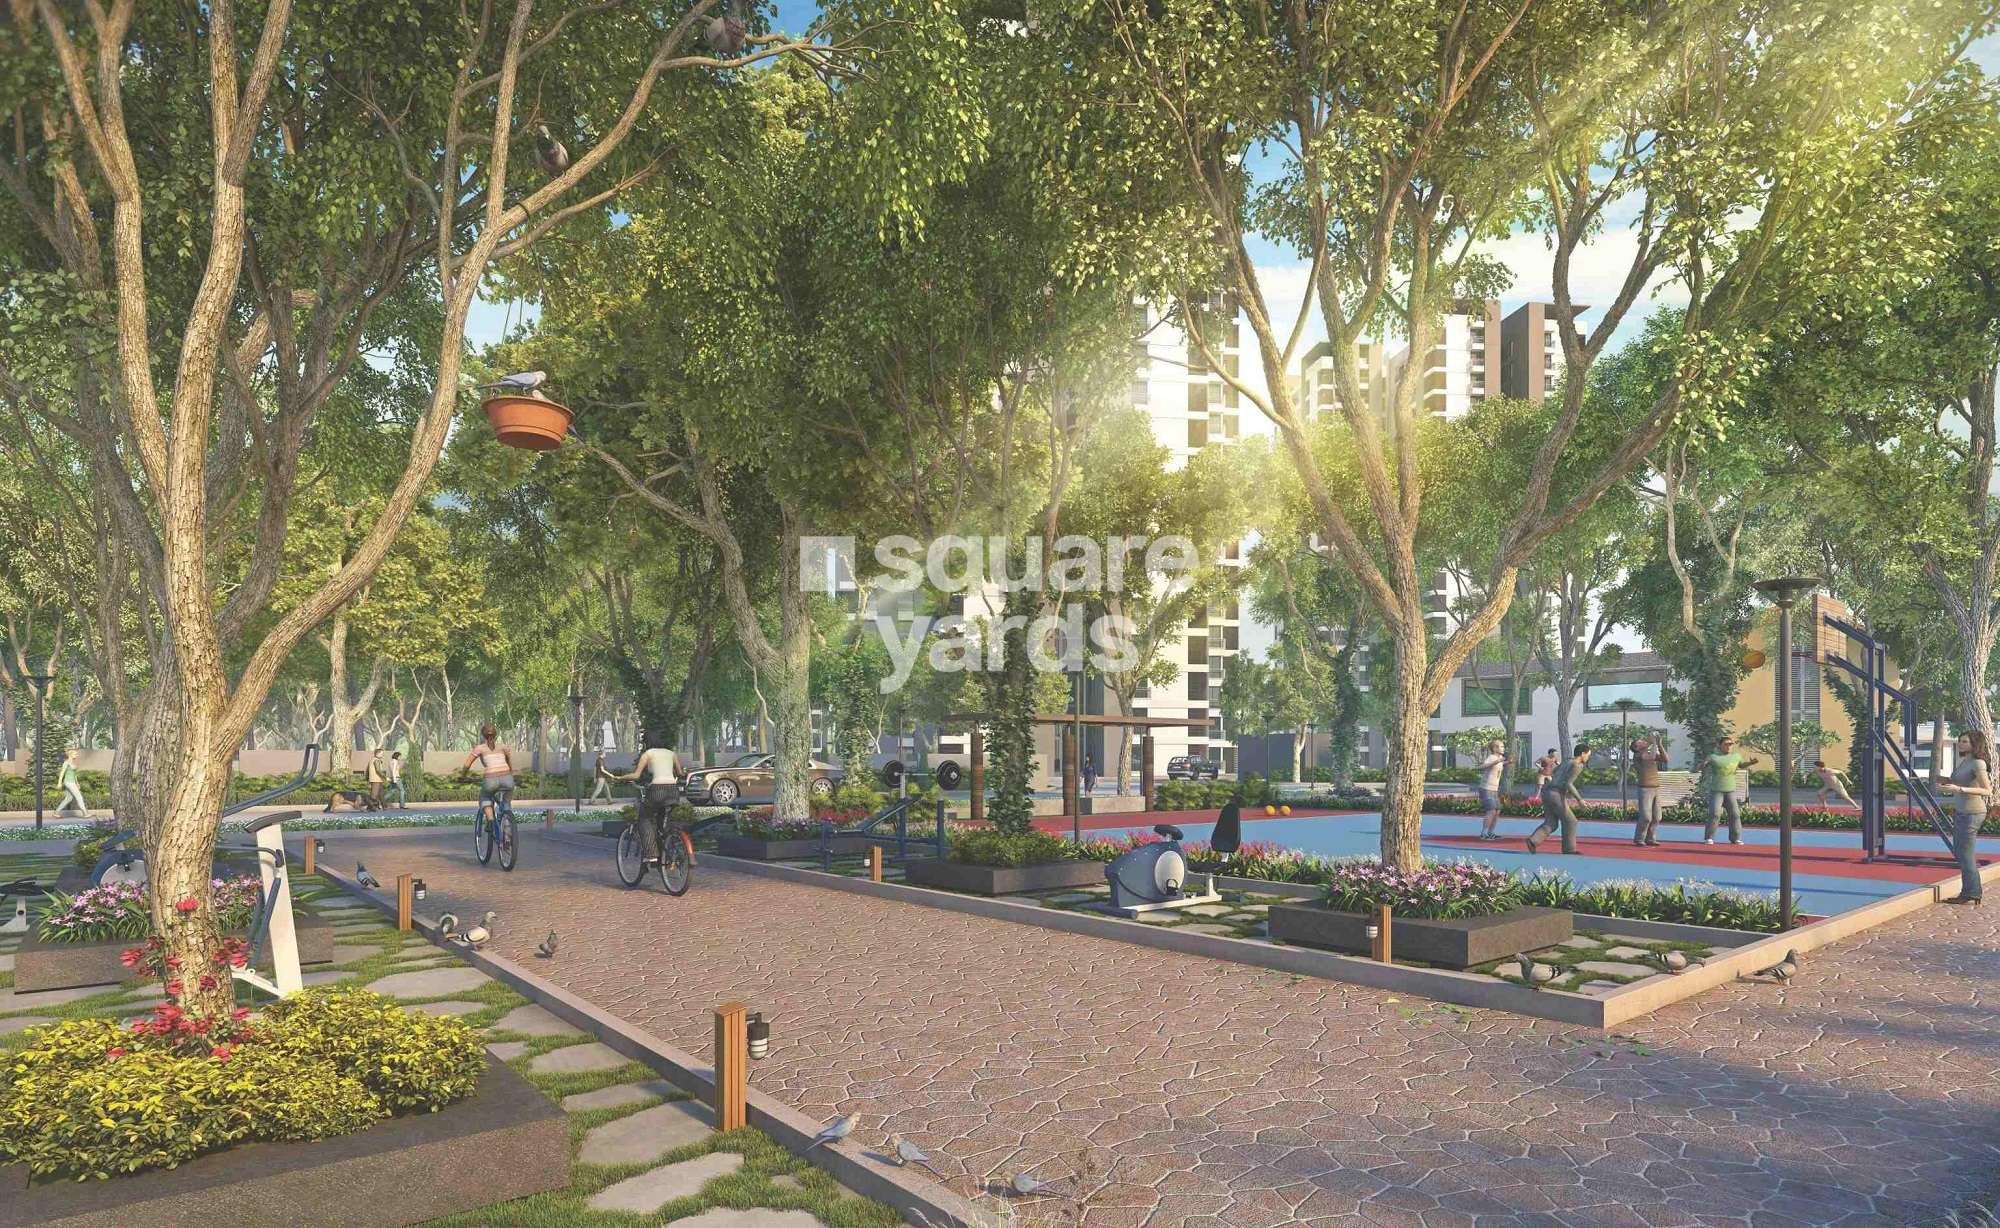 alembic urban forest project amenities features1 1228